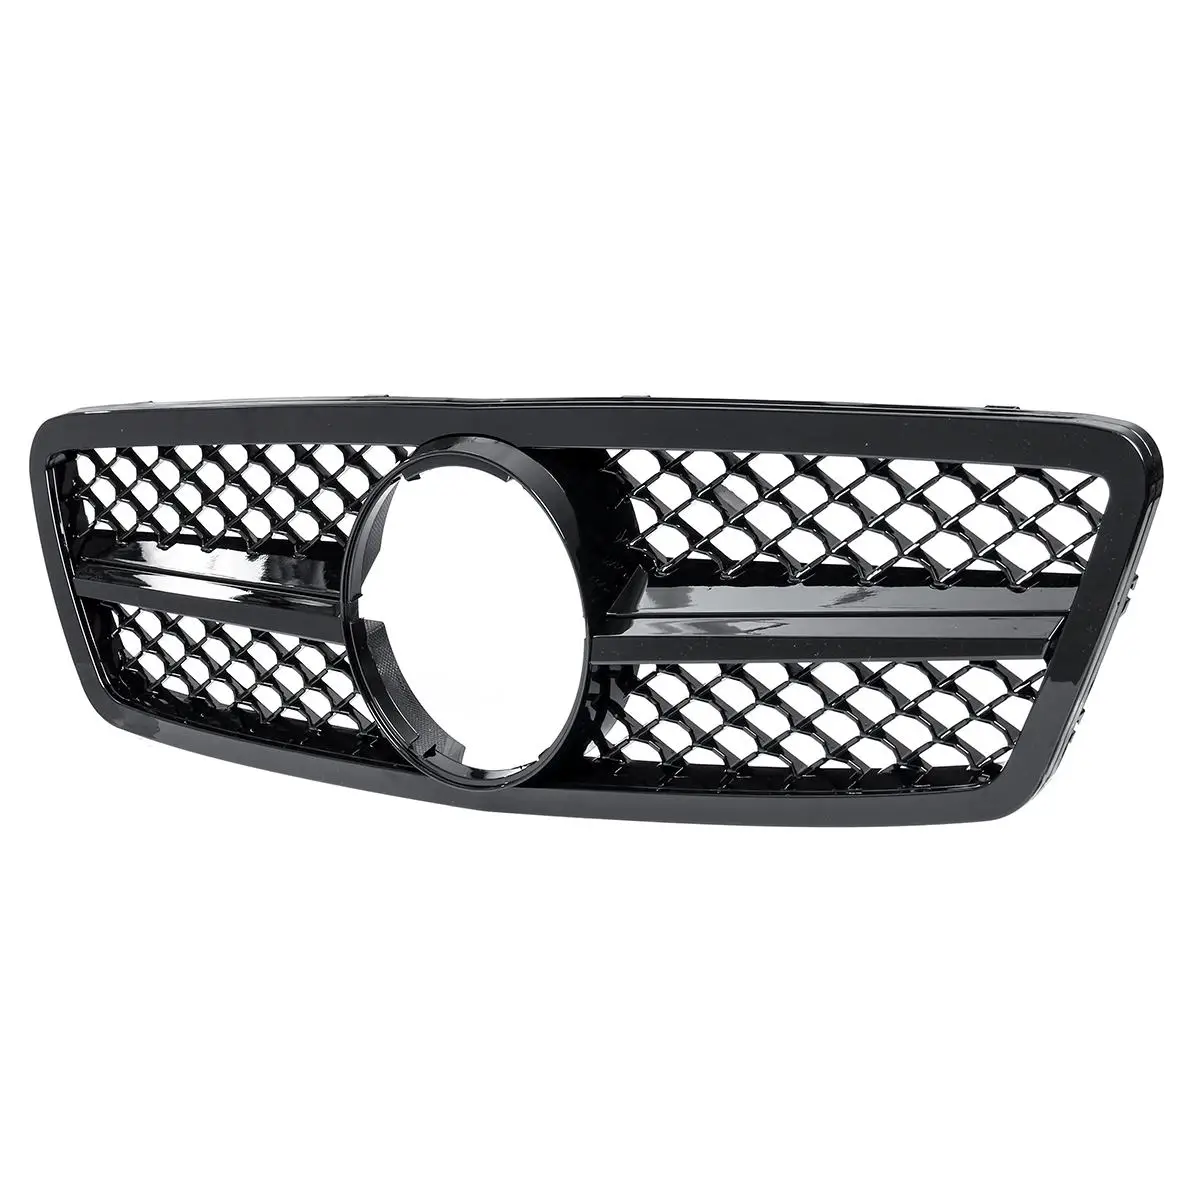 Chrome/Black Car Auto Front Grille Grill For Mercedes For Benz C-Class W203 S203 C280 C320 C240 C200 2001-2007 For AMG Style